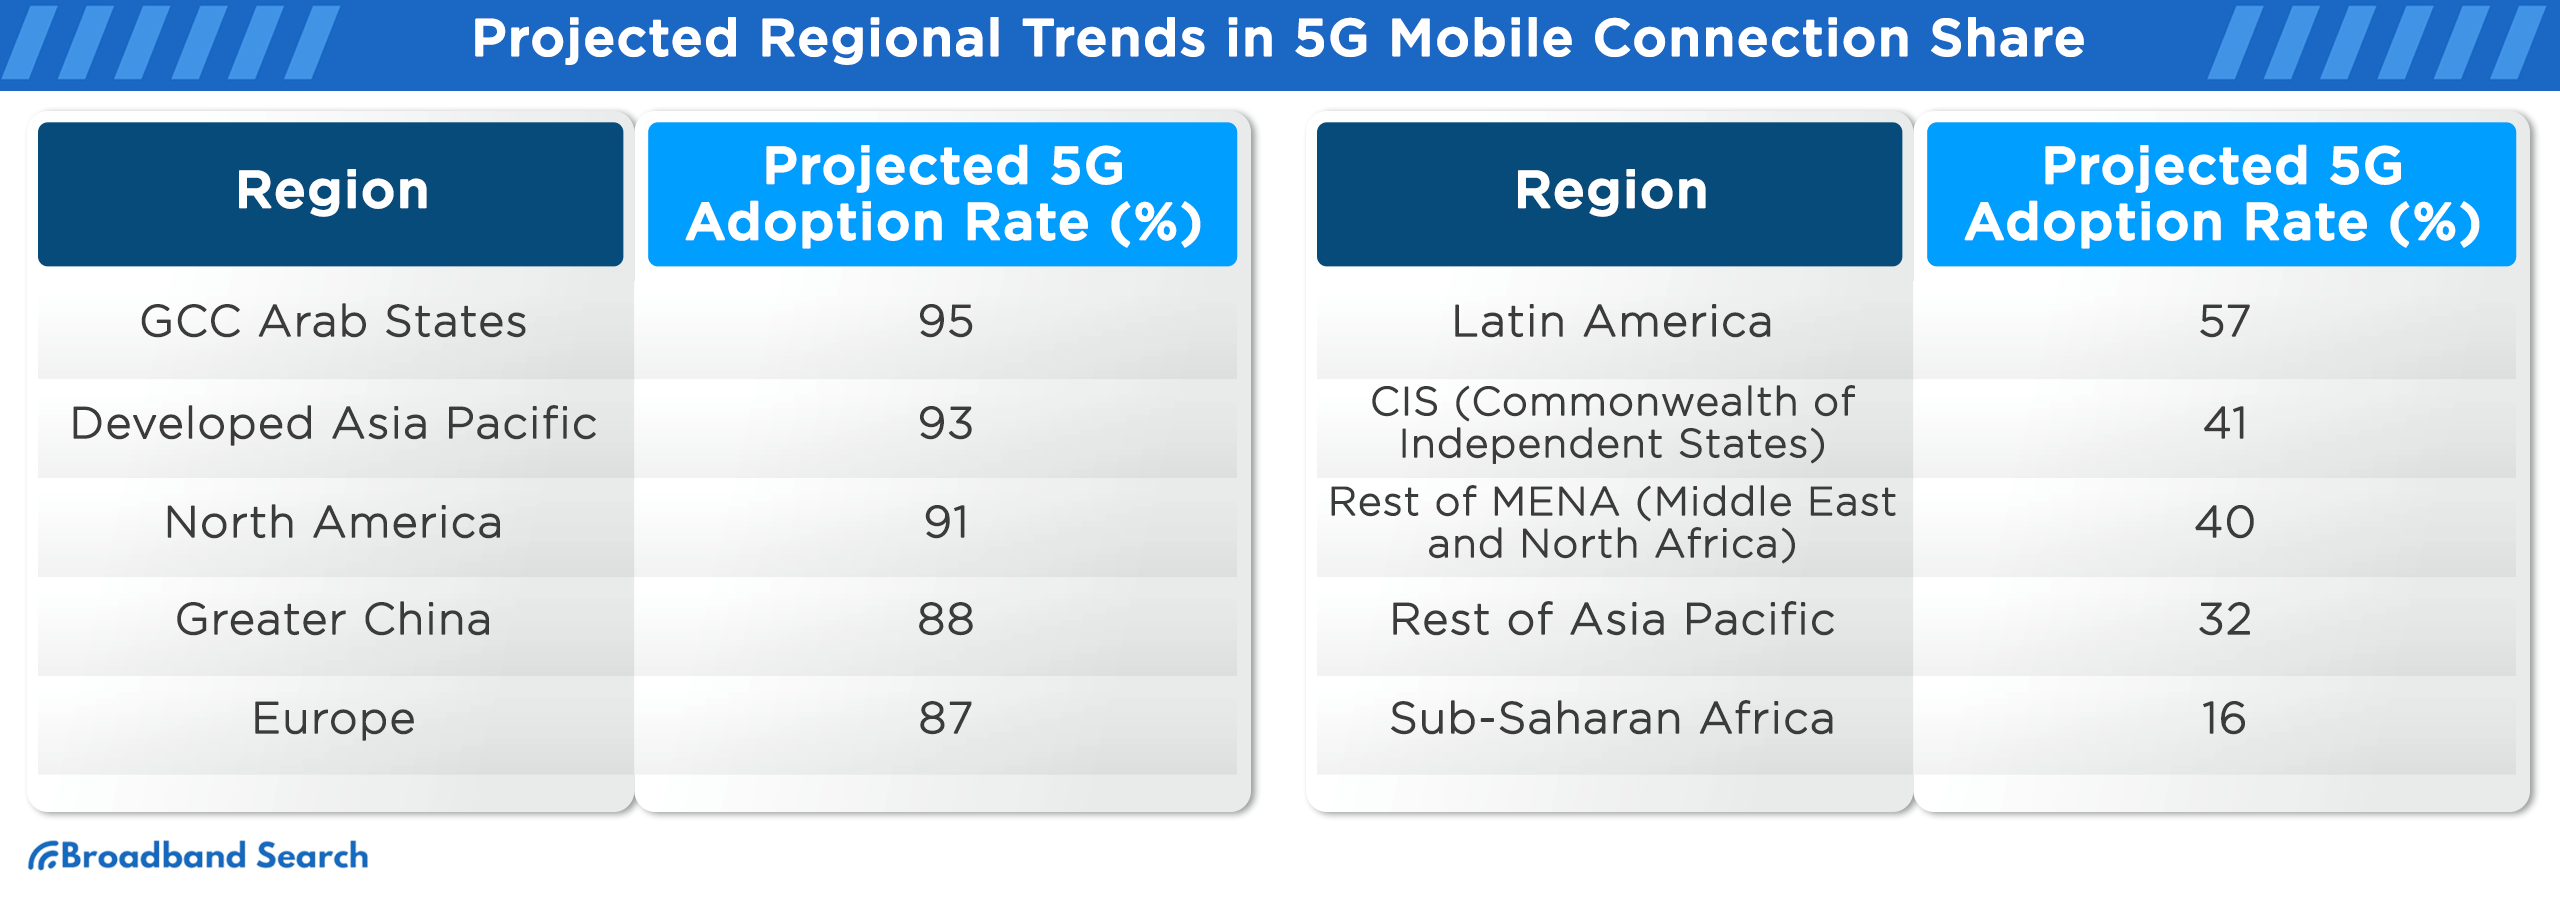 Projected Regional Trends in 5G Mobile Connection Share